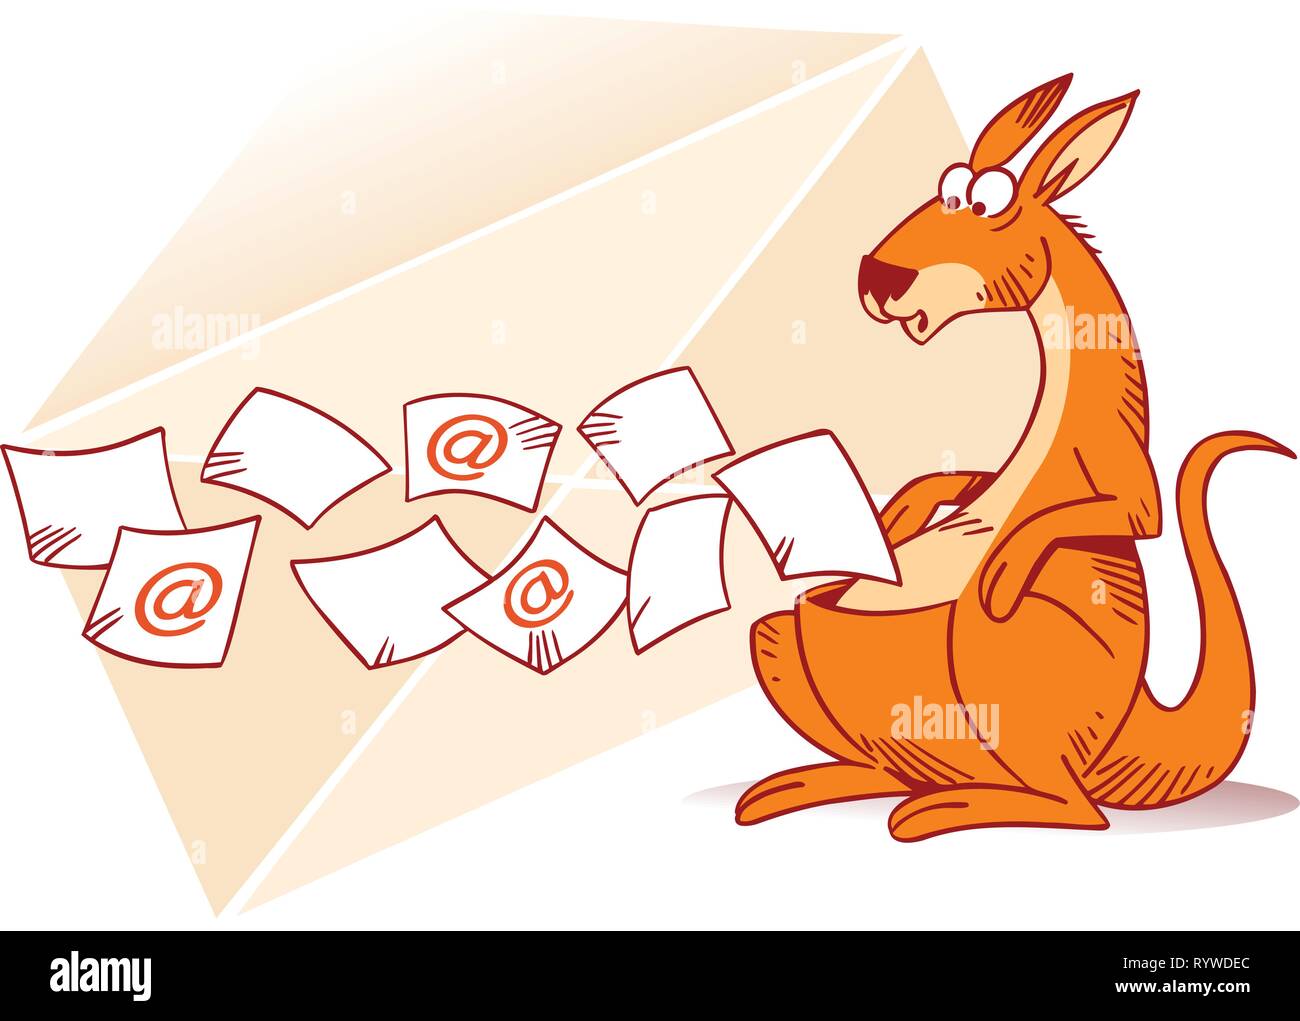 The illustration shows a kangaroo that collects e-mails in a bag. In the background shows a paper envelope. Illustration done in cartoon style Stock Vector